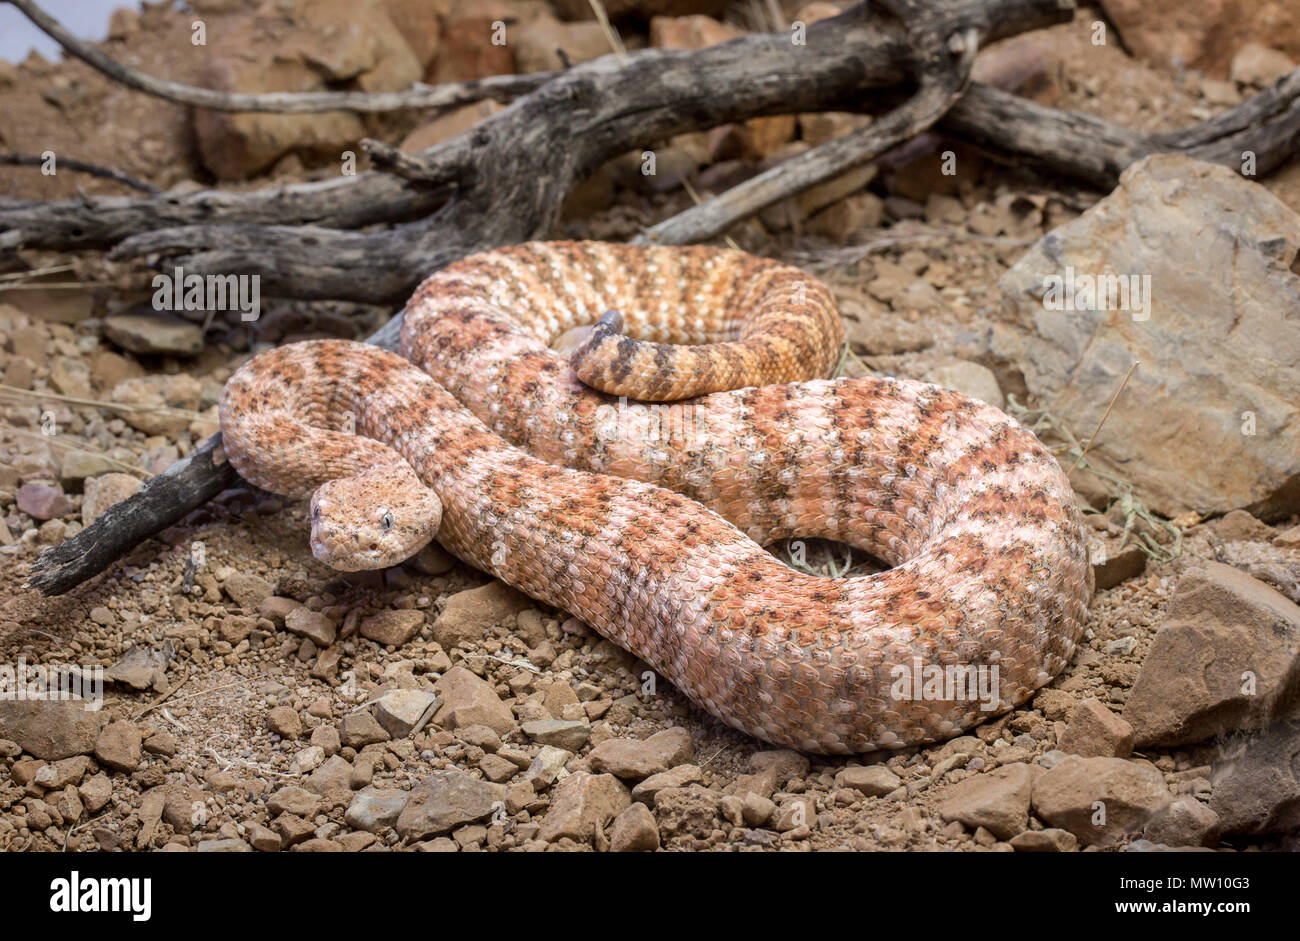 Speckled Rattlesnake on Ground with Rocks and Sticks Stock Photo